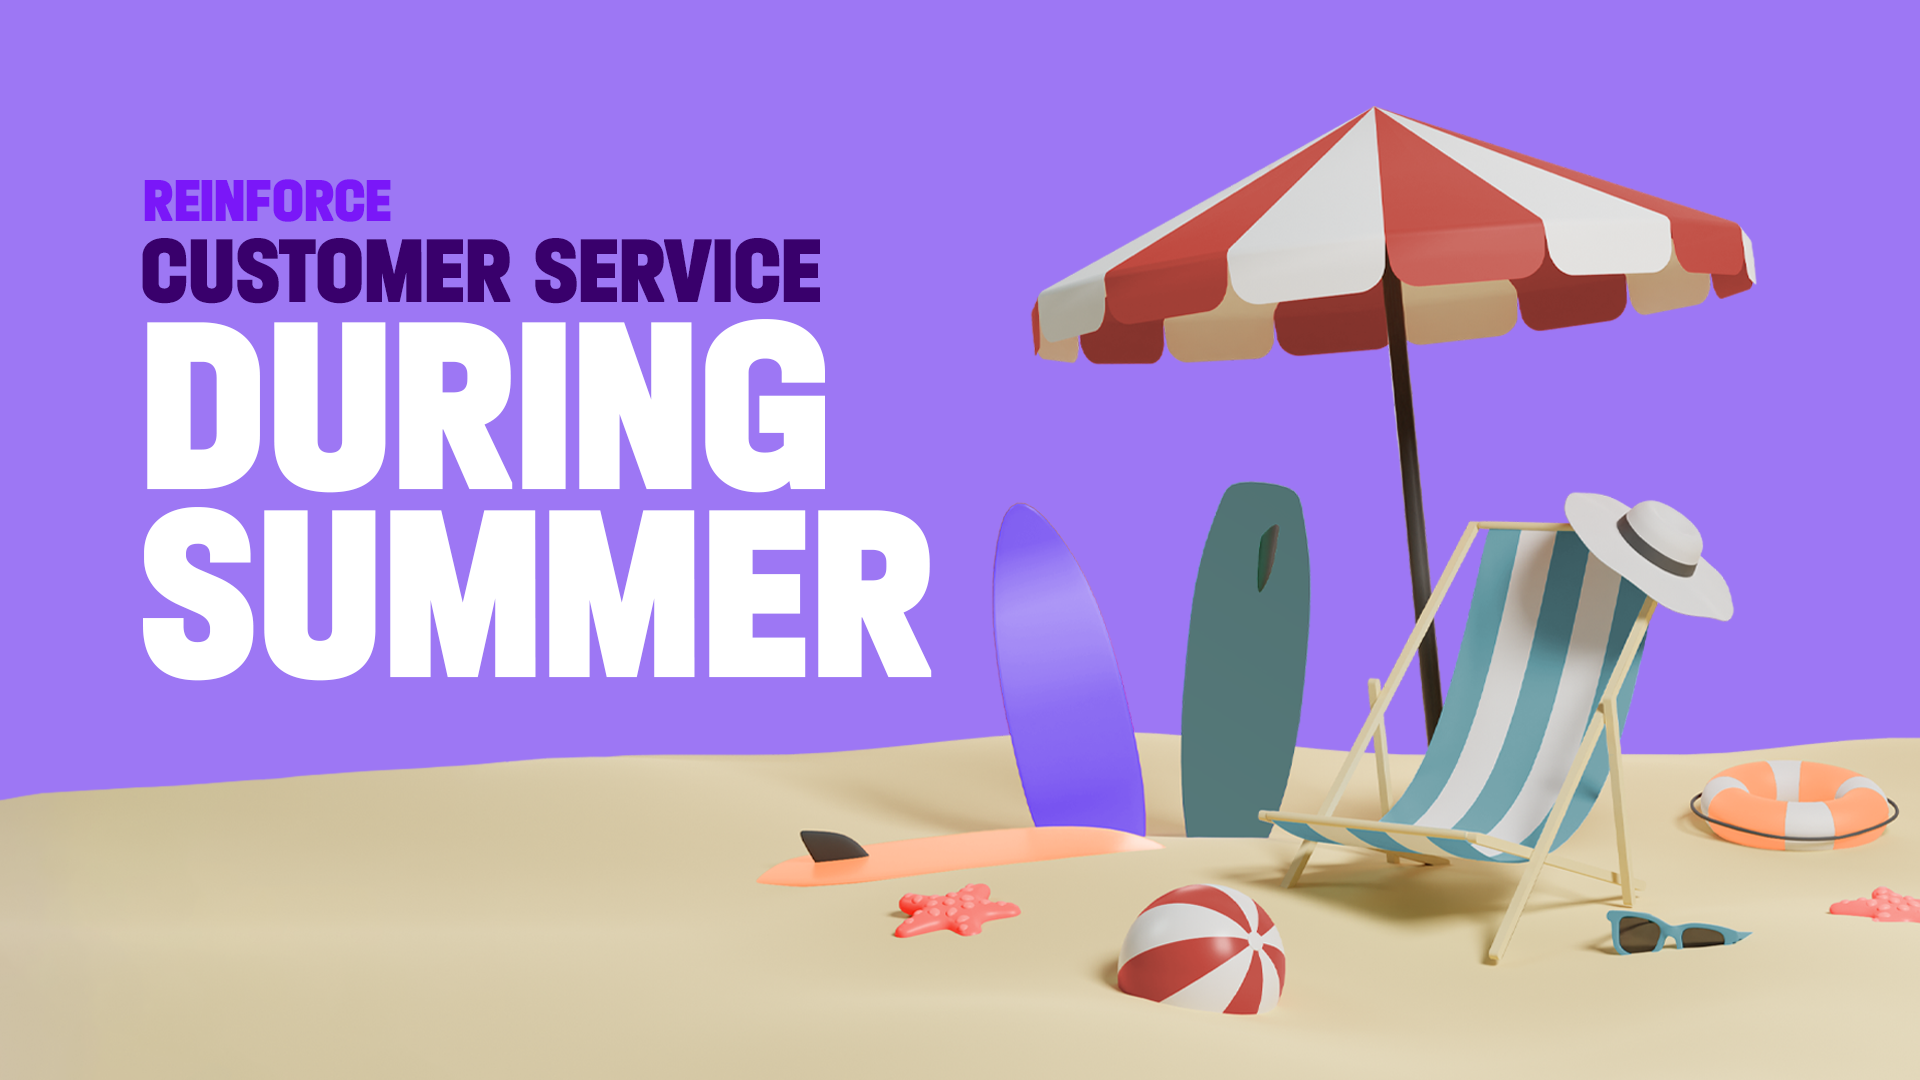 How To Transform Business Customer Service This Summer?